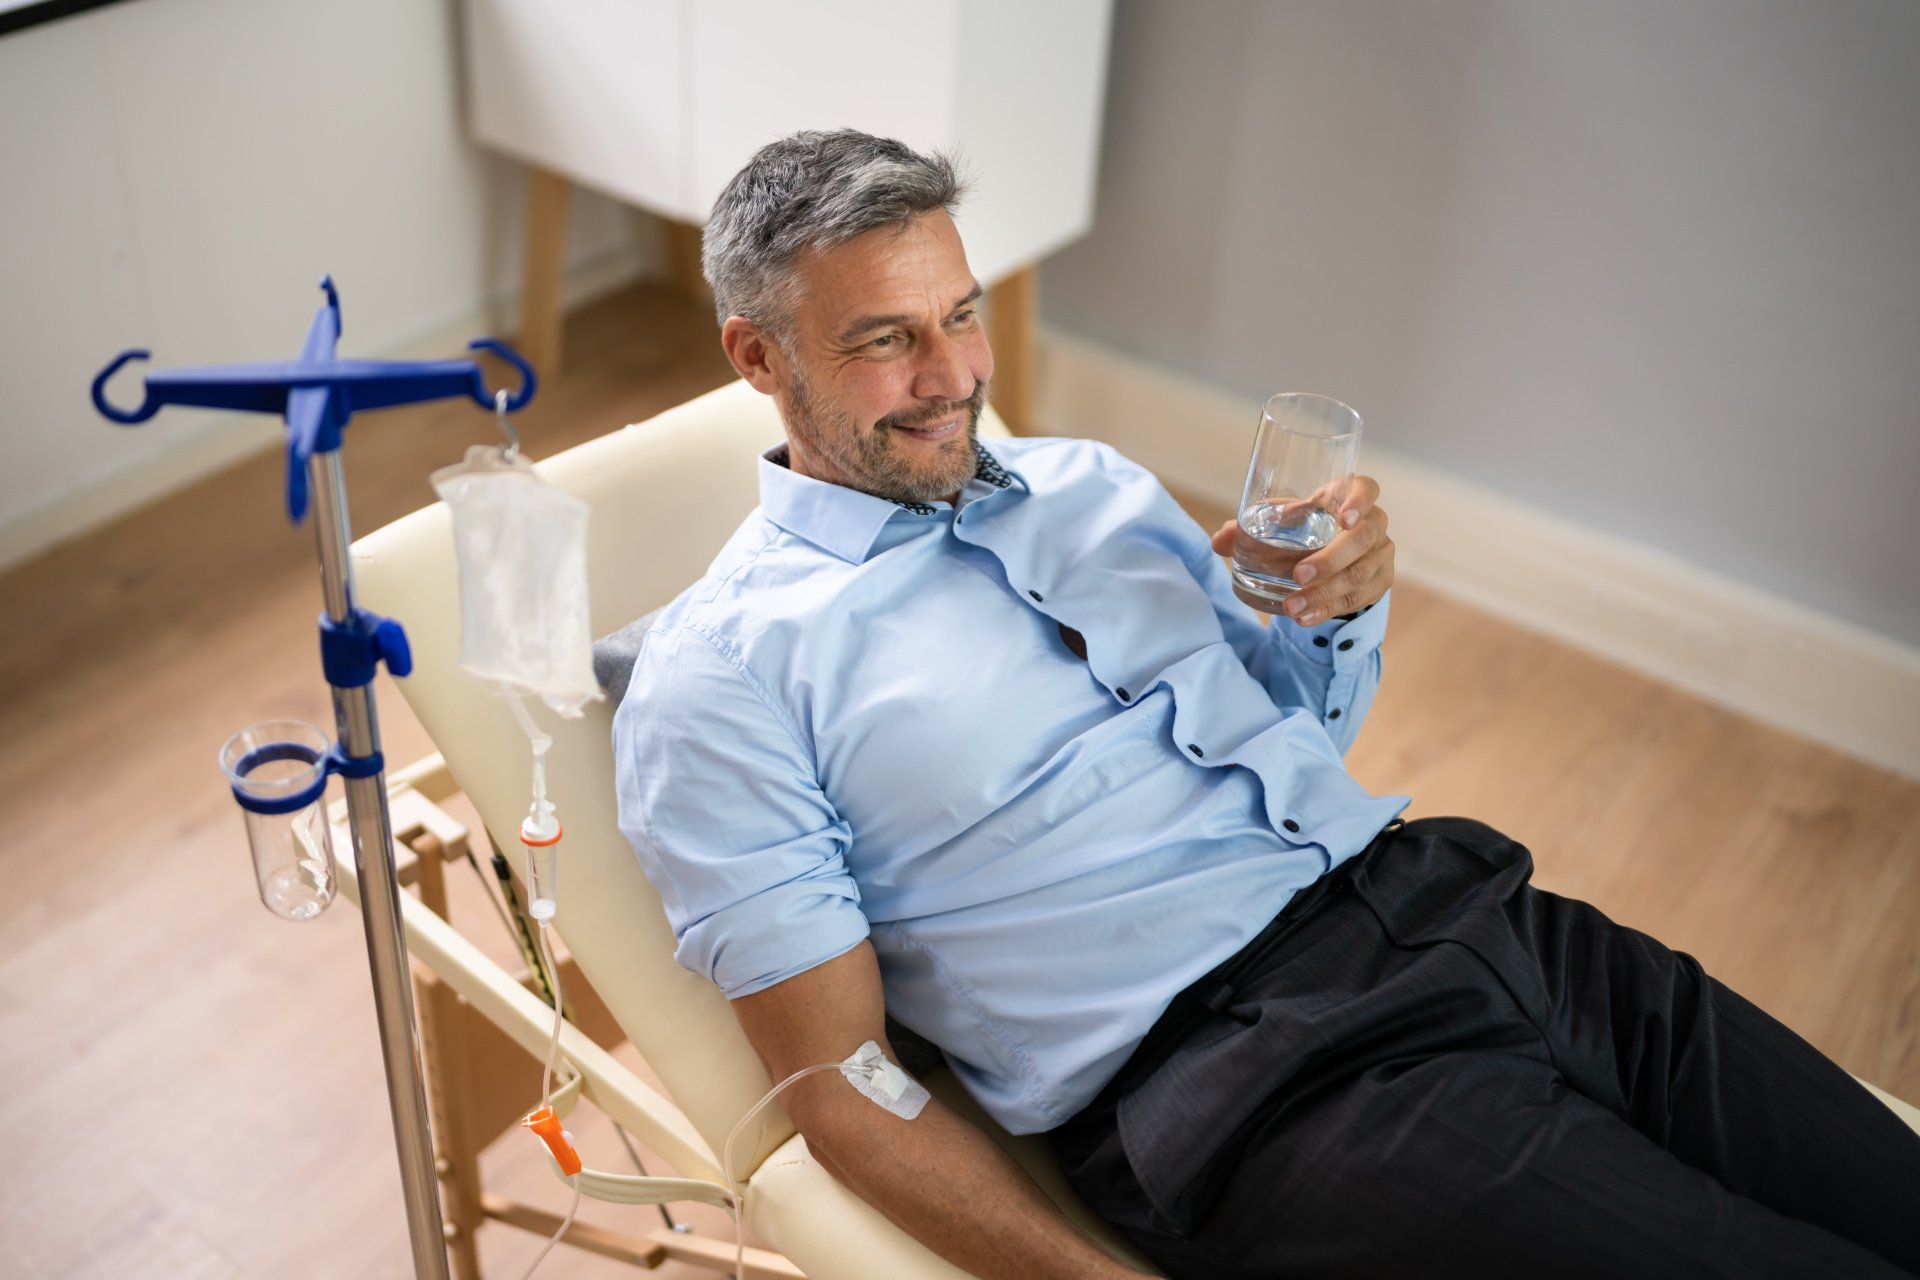 5 Reasons to Have IV Nutrition Therapy Wellness Goals